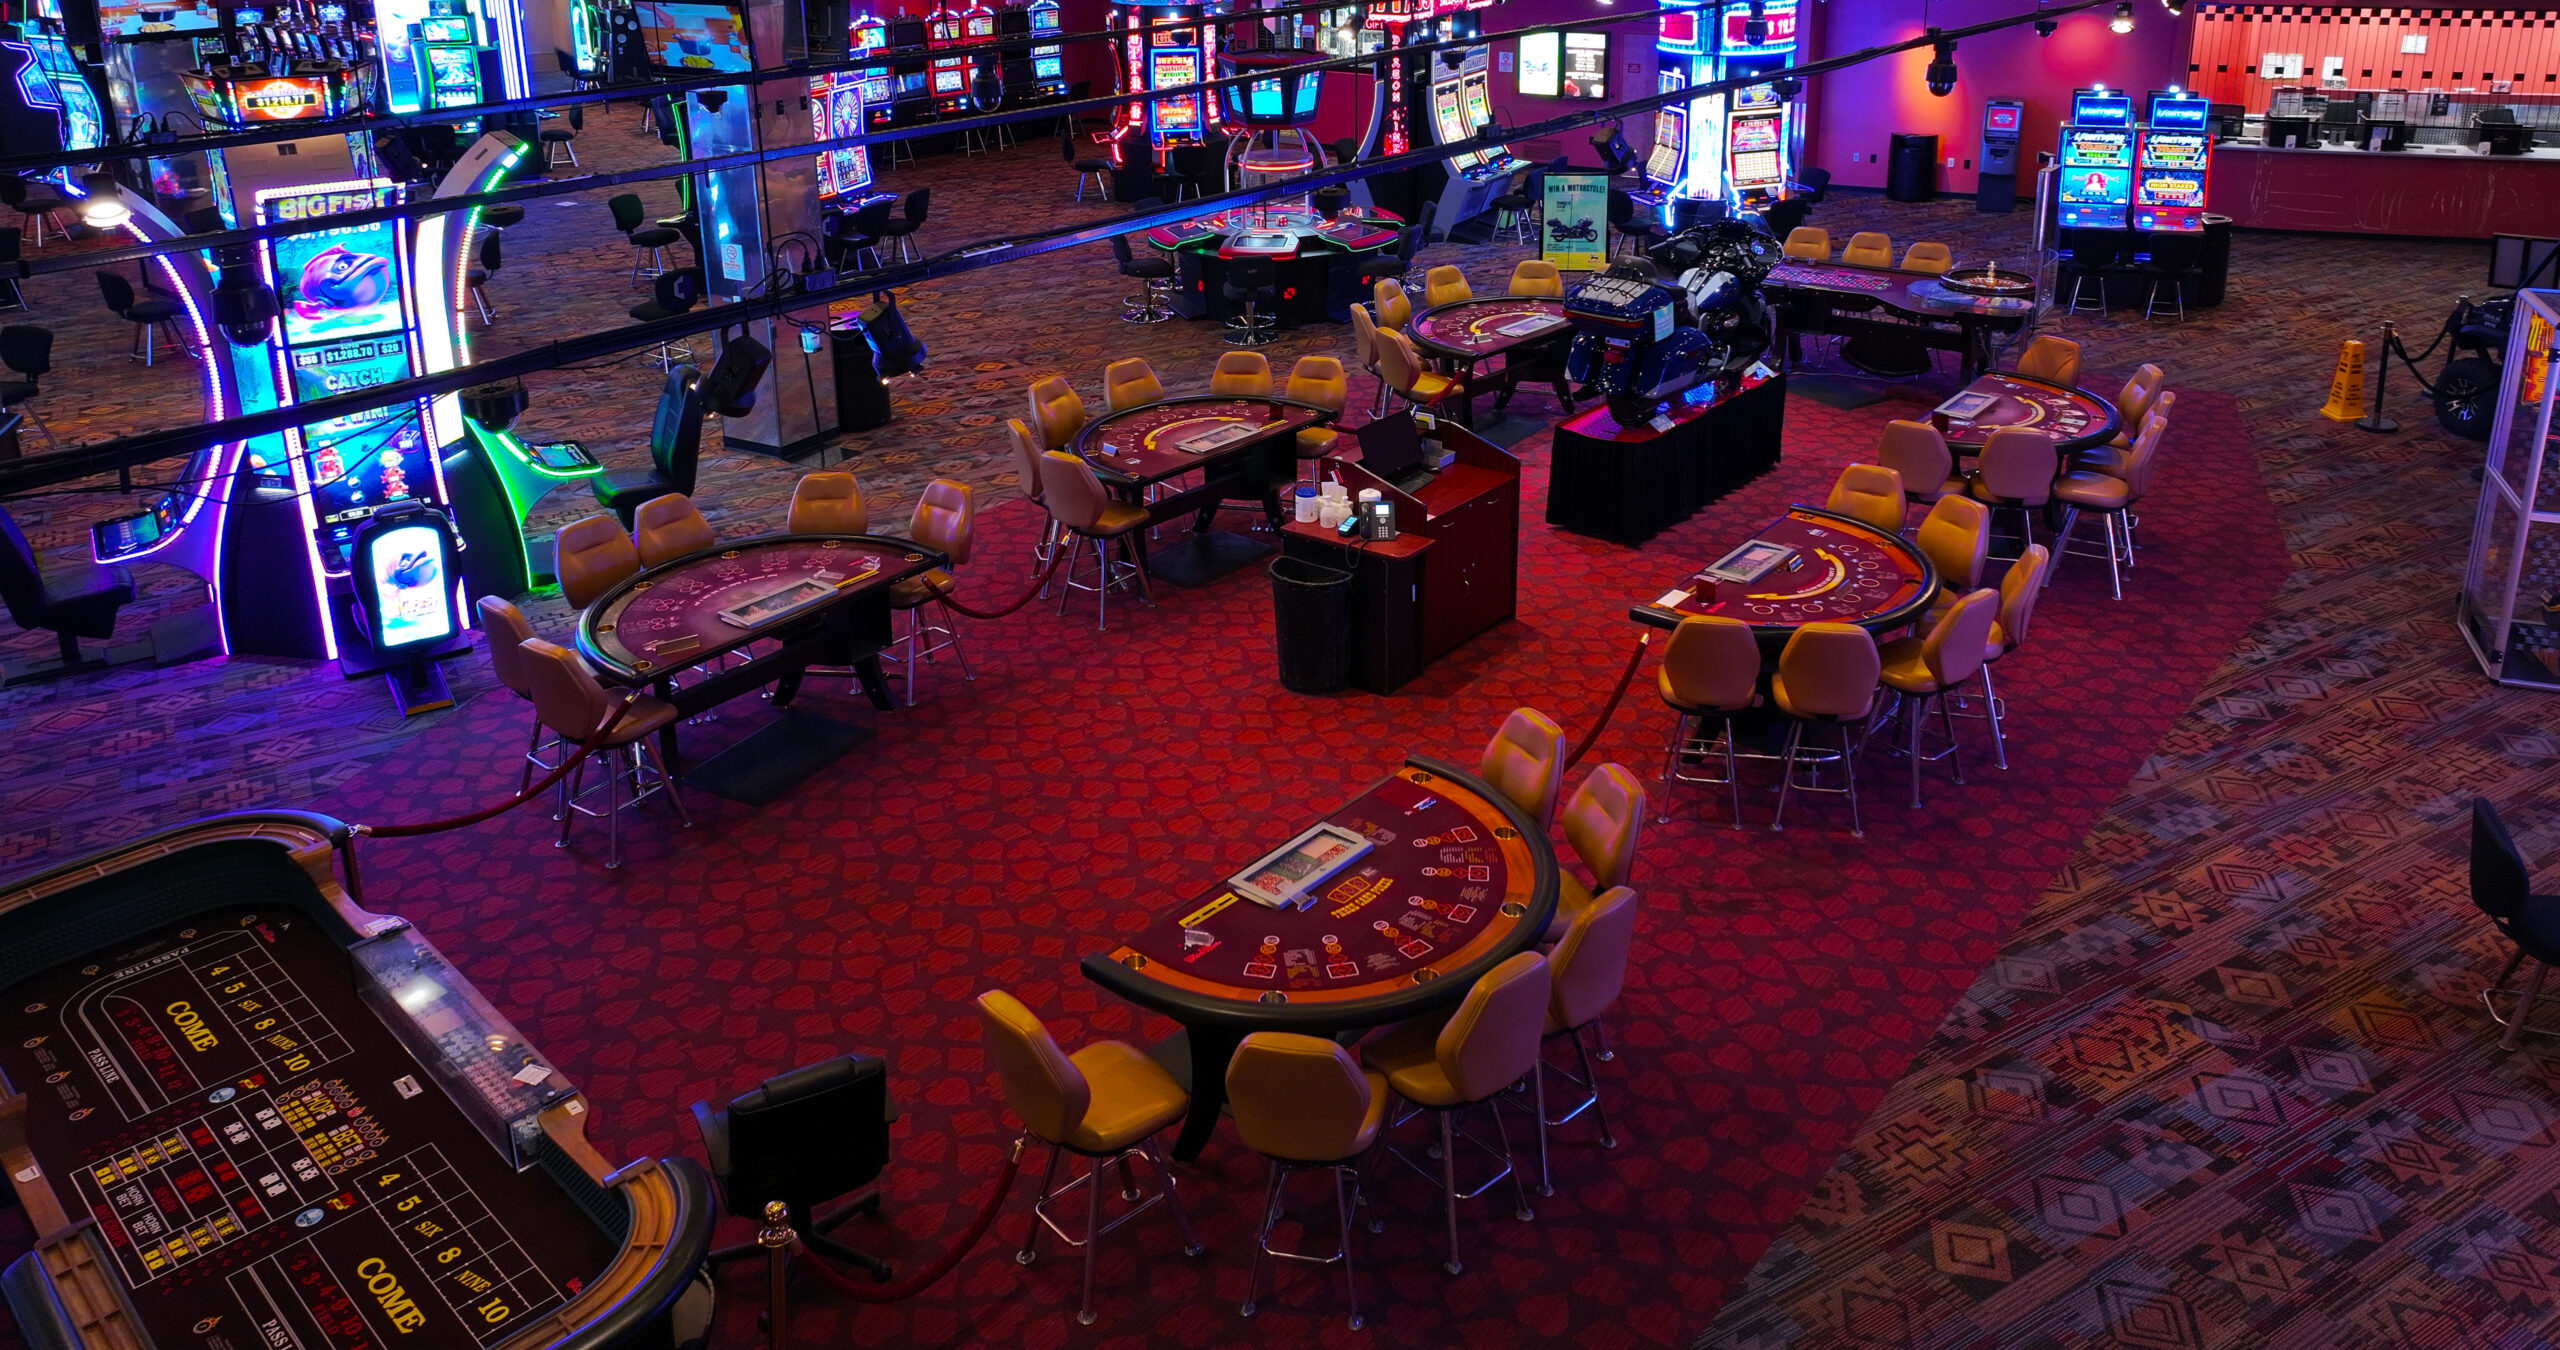 Poker and blackjack tables and Wind River Hotel Casino